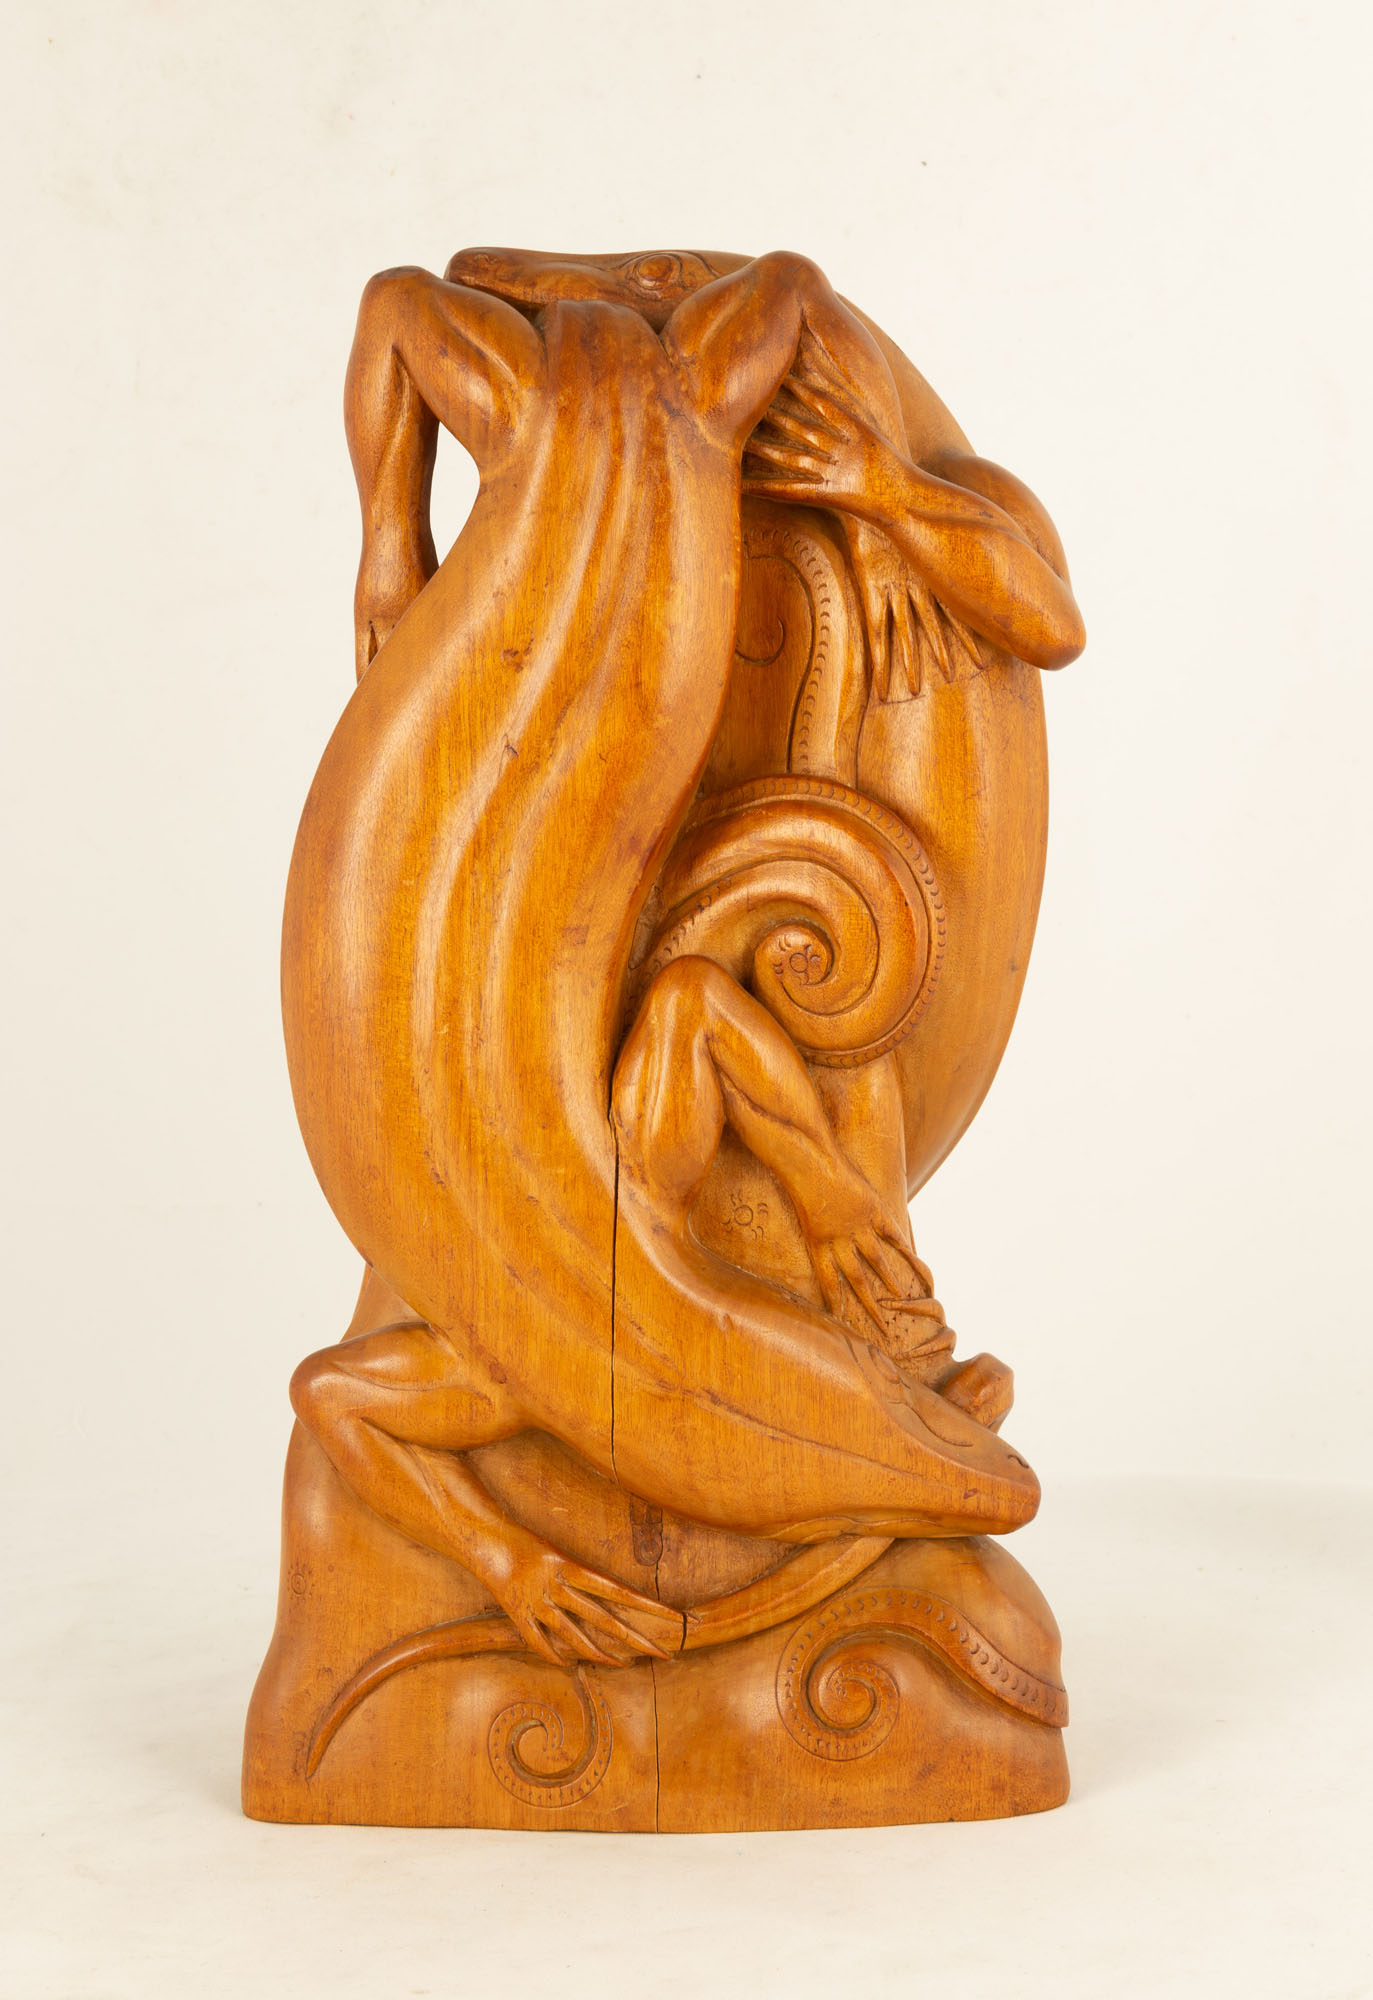 Carved Lizards Intertwined by I. Penet. - Image 2 of 2